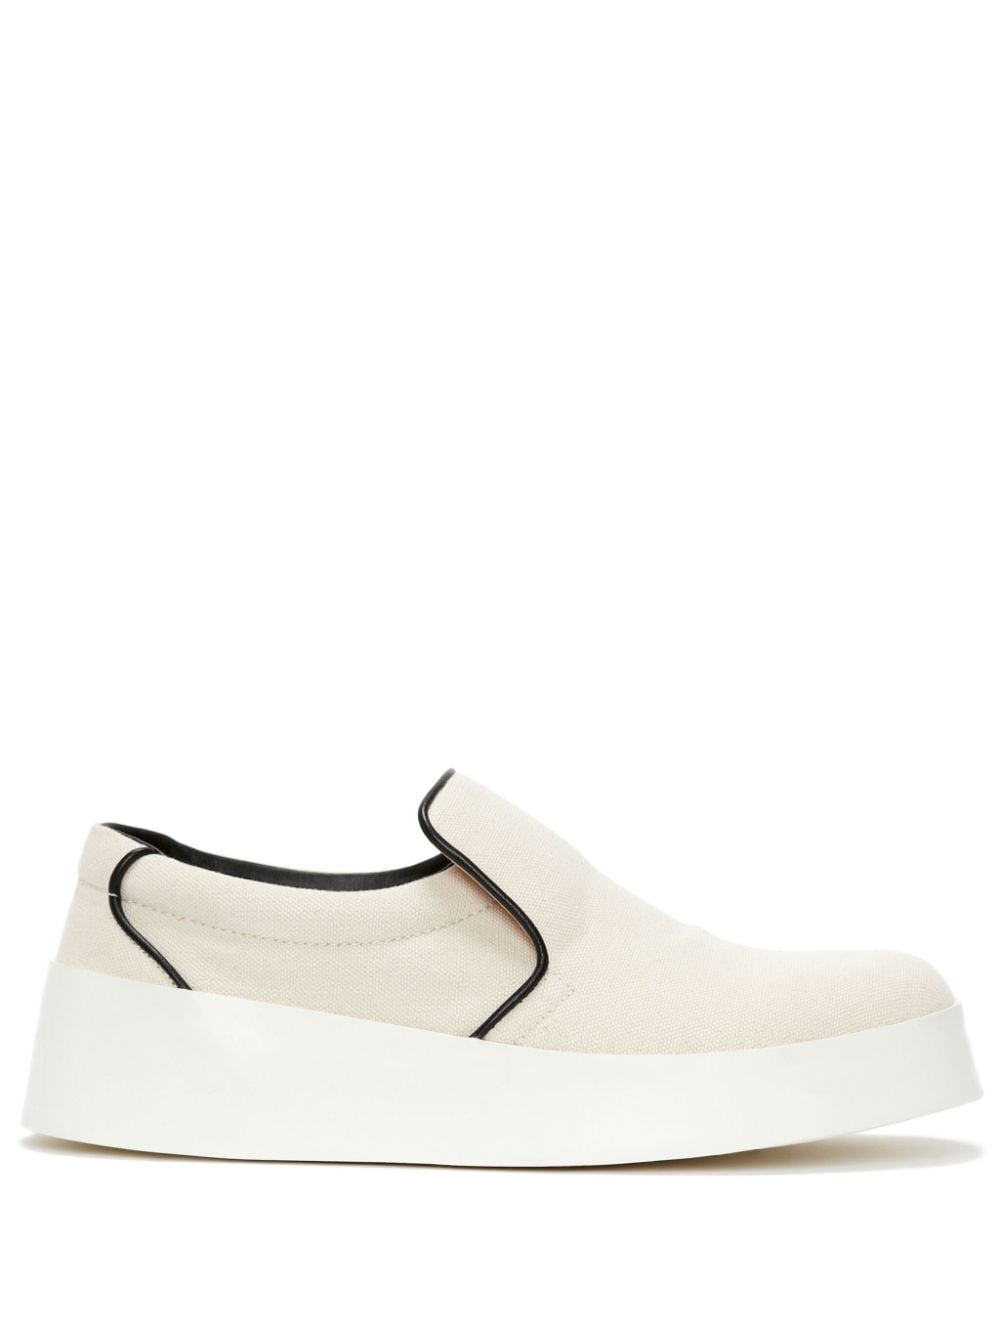 JW Anderson canvas slip-on sneakers - Neutrals